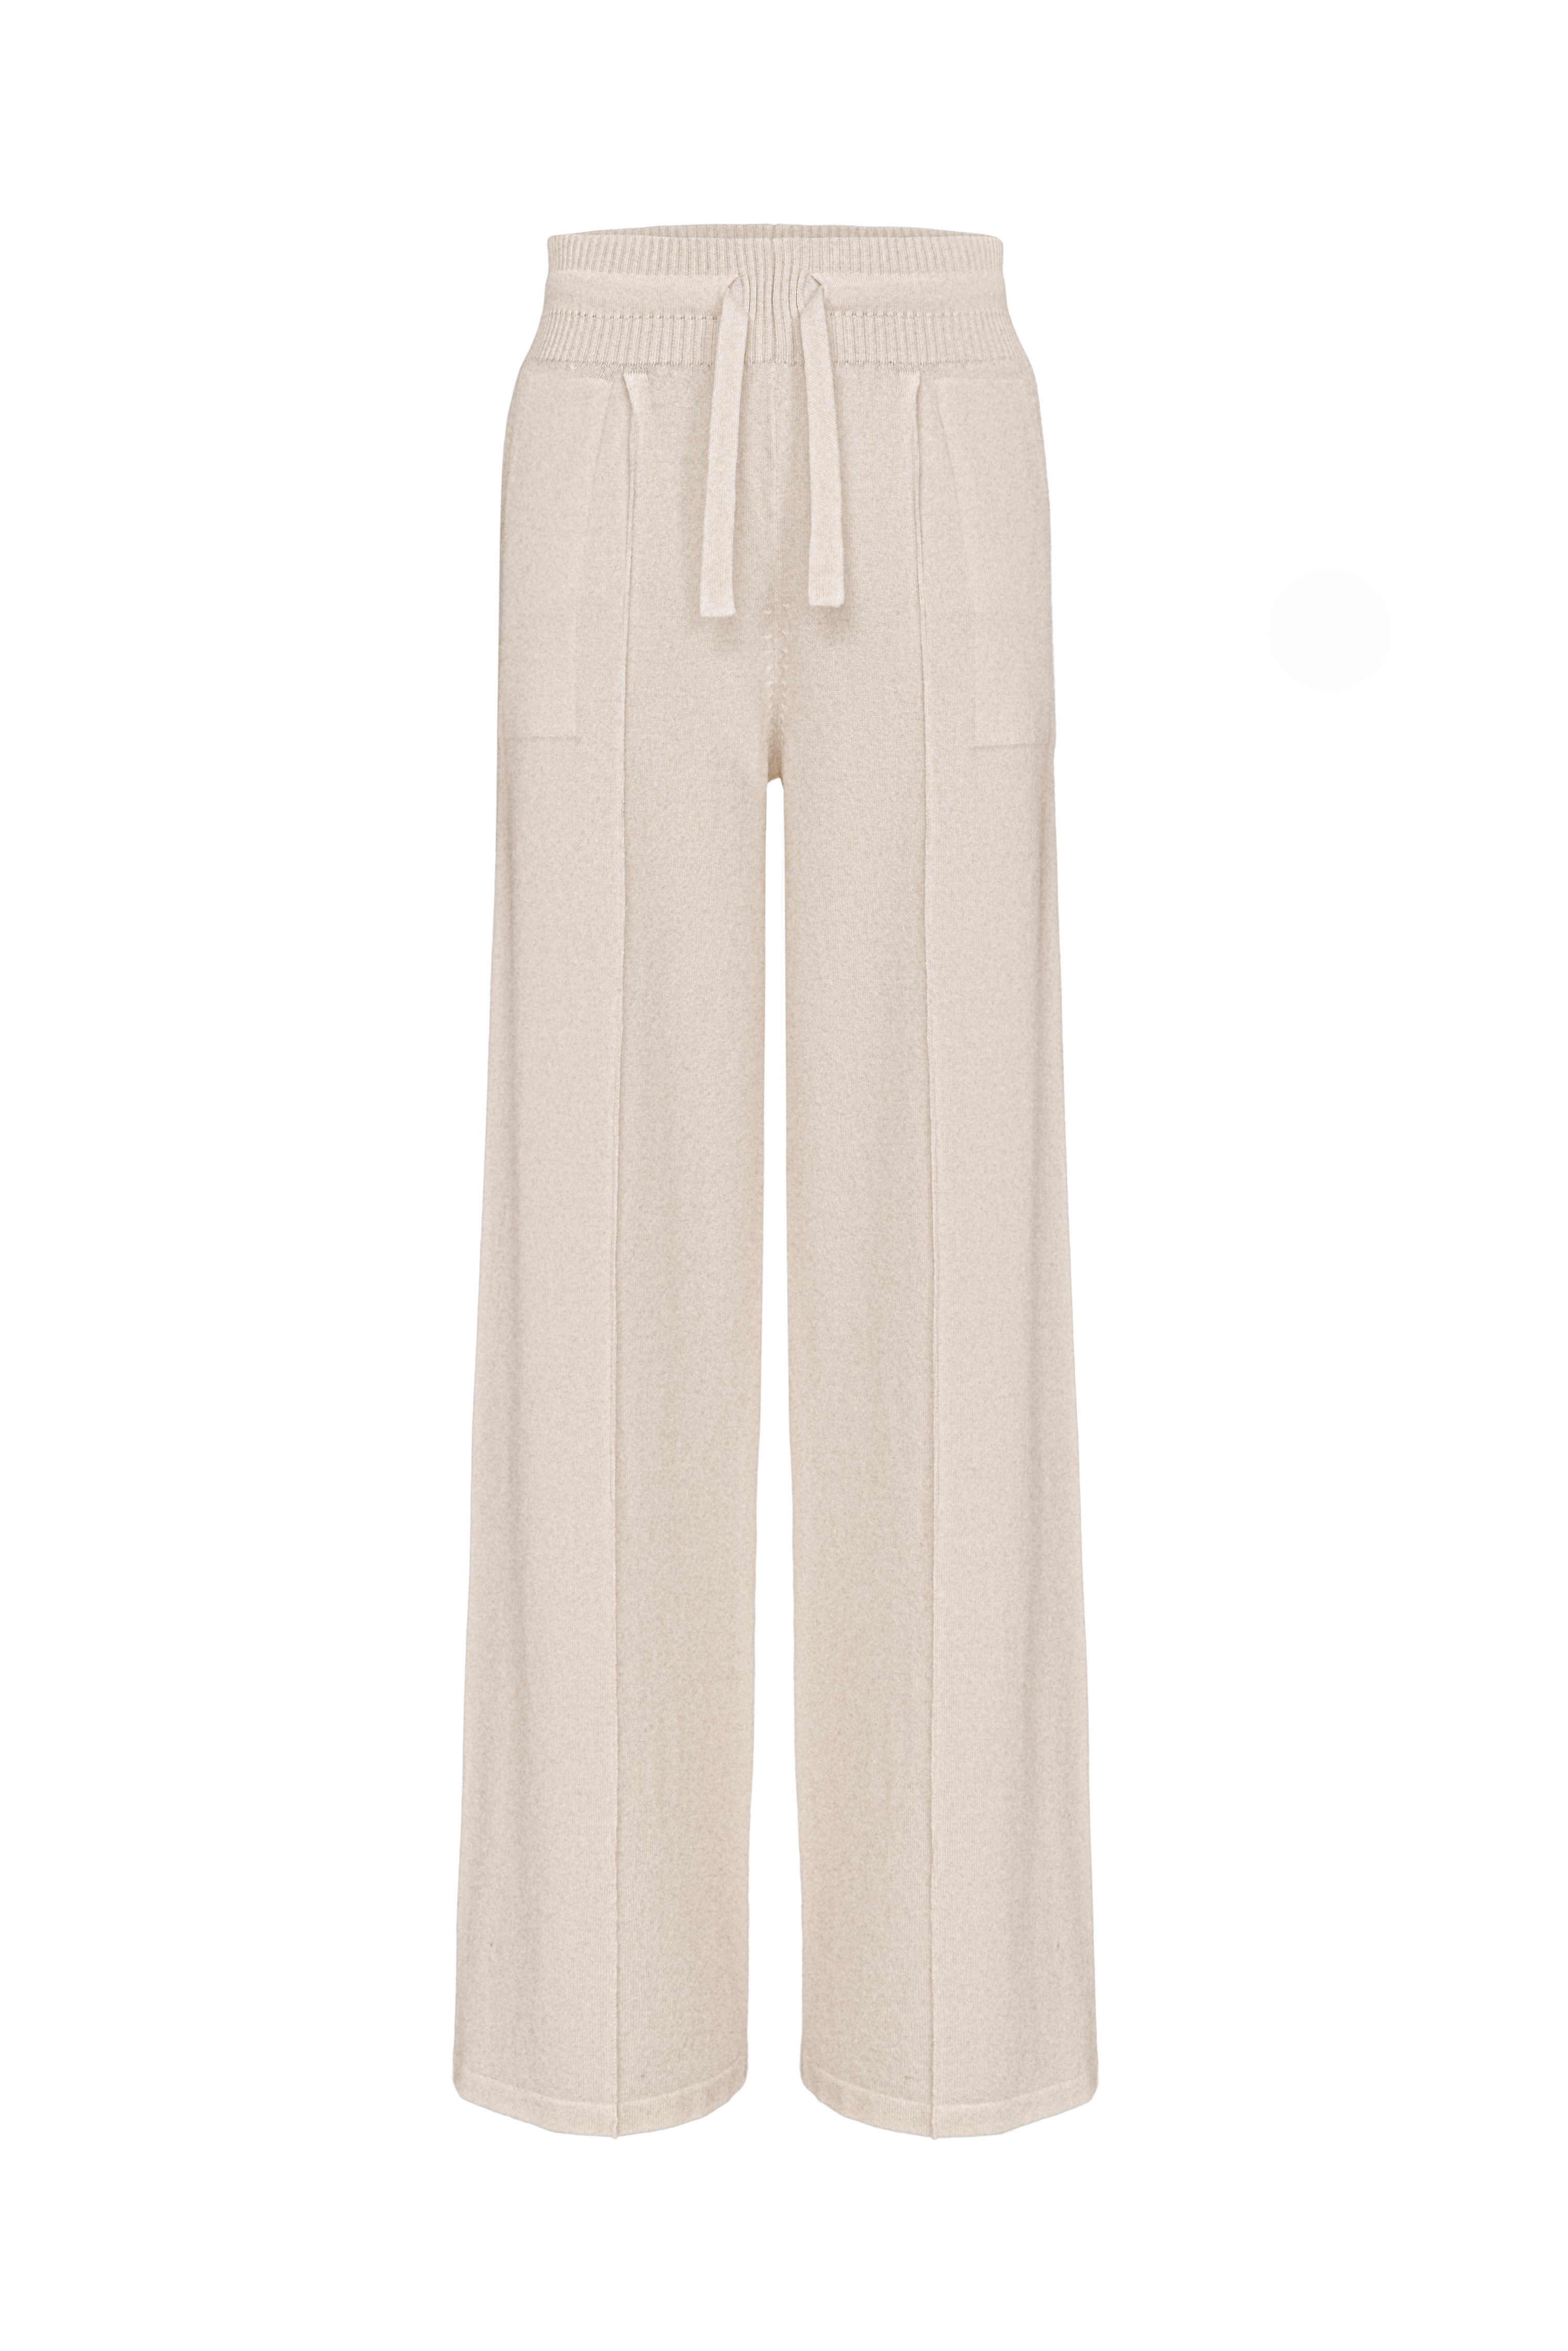 Trousers 3683-45 Beige from BRUSNiKA